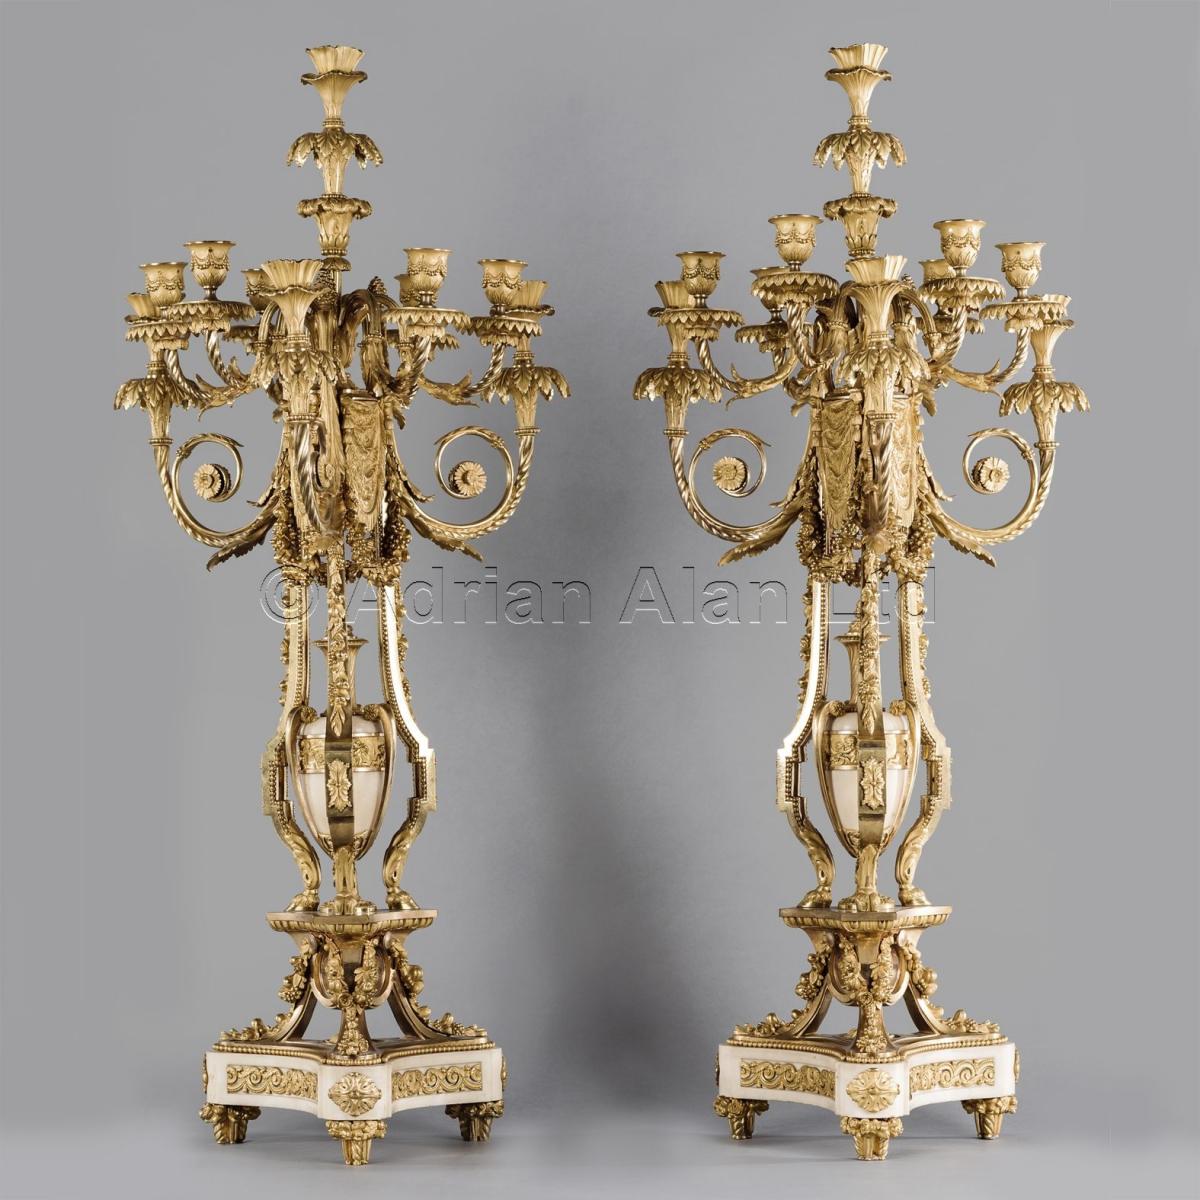 A Pair Of Ten-Light Candelabra After Pierre Gouthière, by Henri Picard ©AdrianAlanLtd